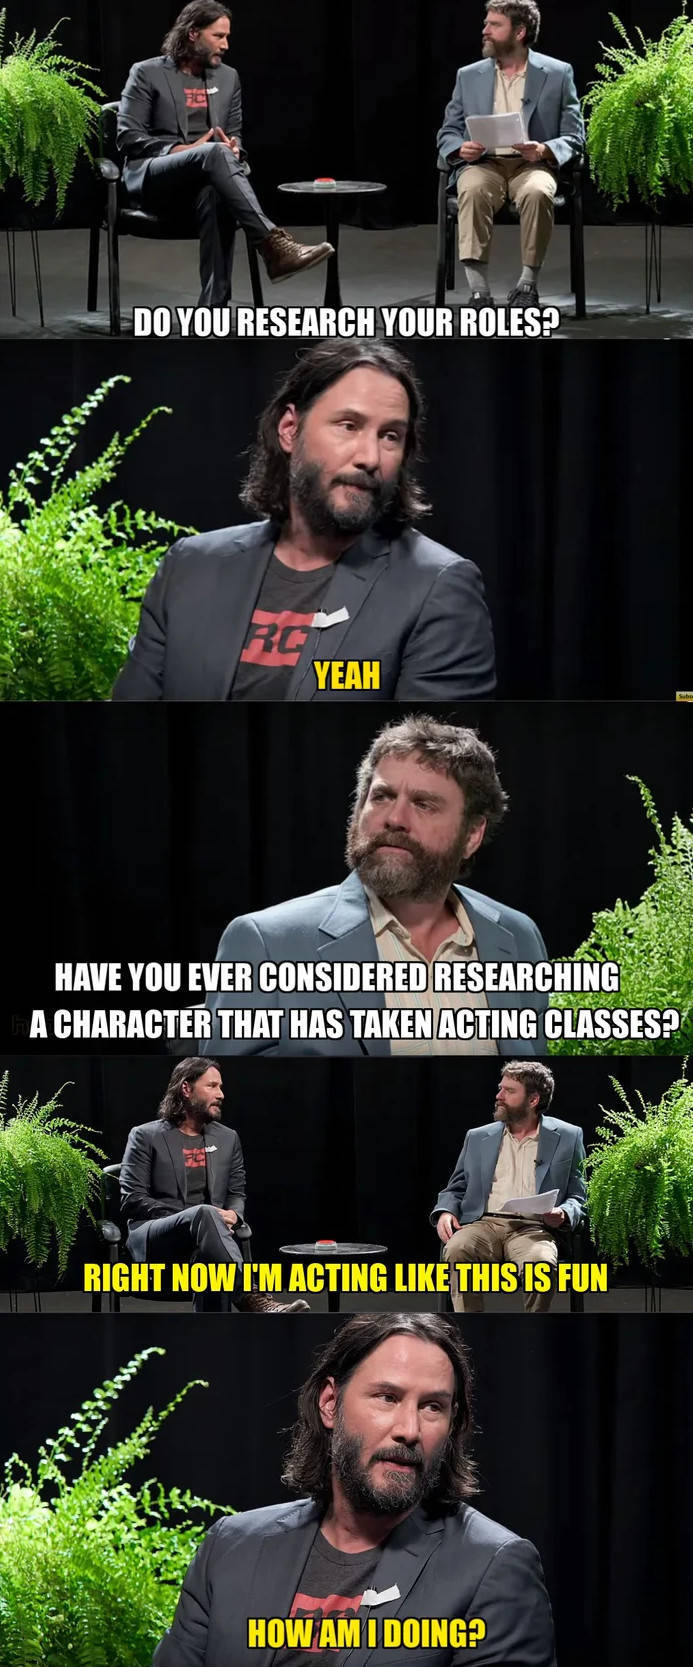 zach galifianakis keanu reeves - Do You Research Your Roles? Nie Rc Yeah Have You Ever Considered Researching A Character That Has Taken Acting Classes? Right Now I'M Acting This Is Fun How Am I Doing?